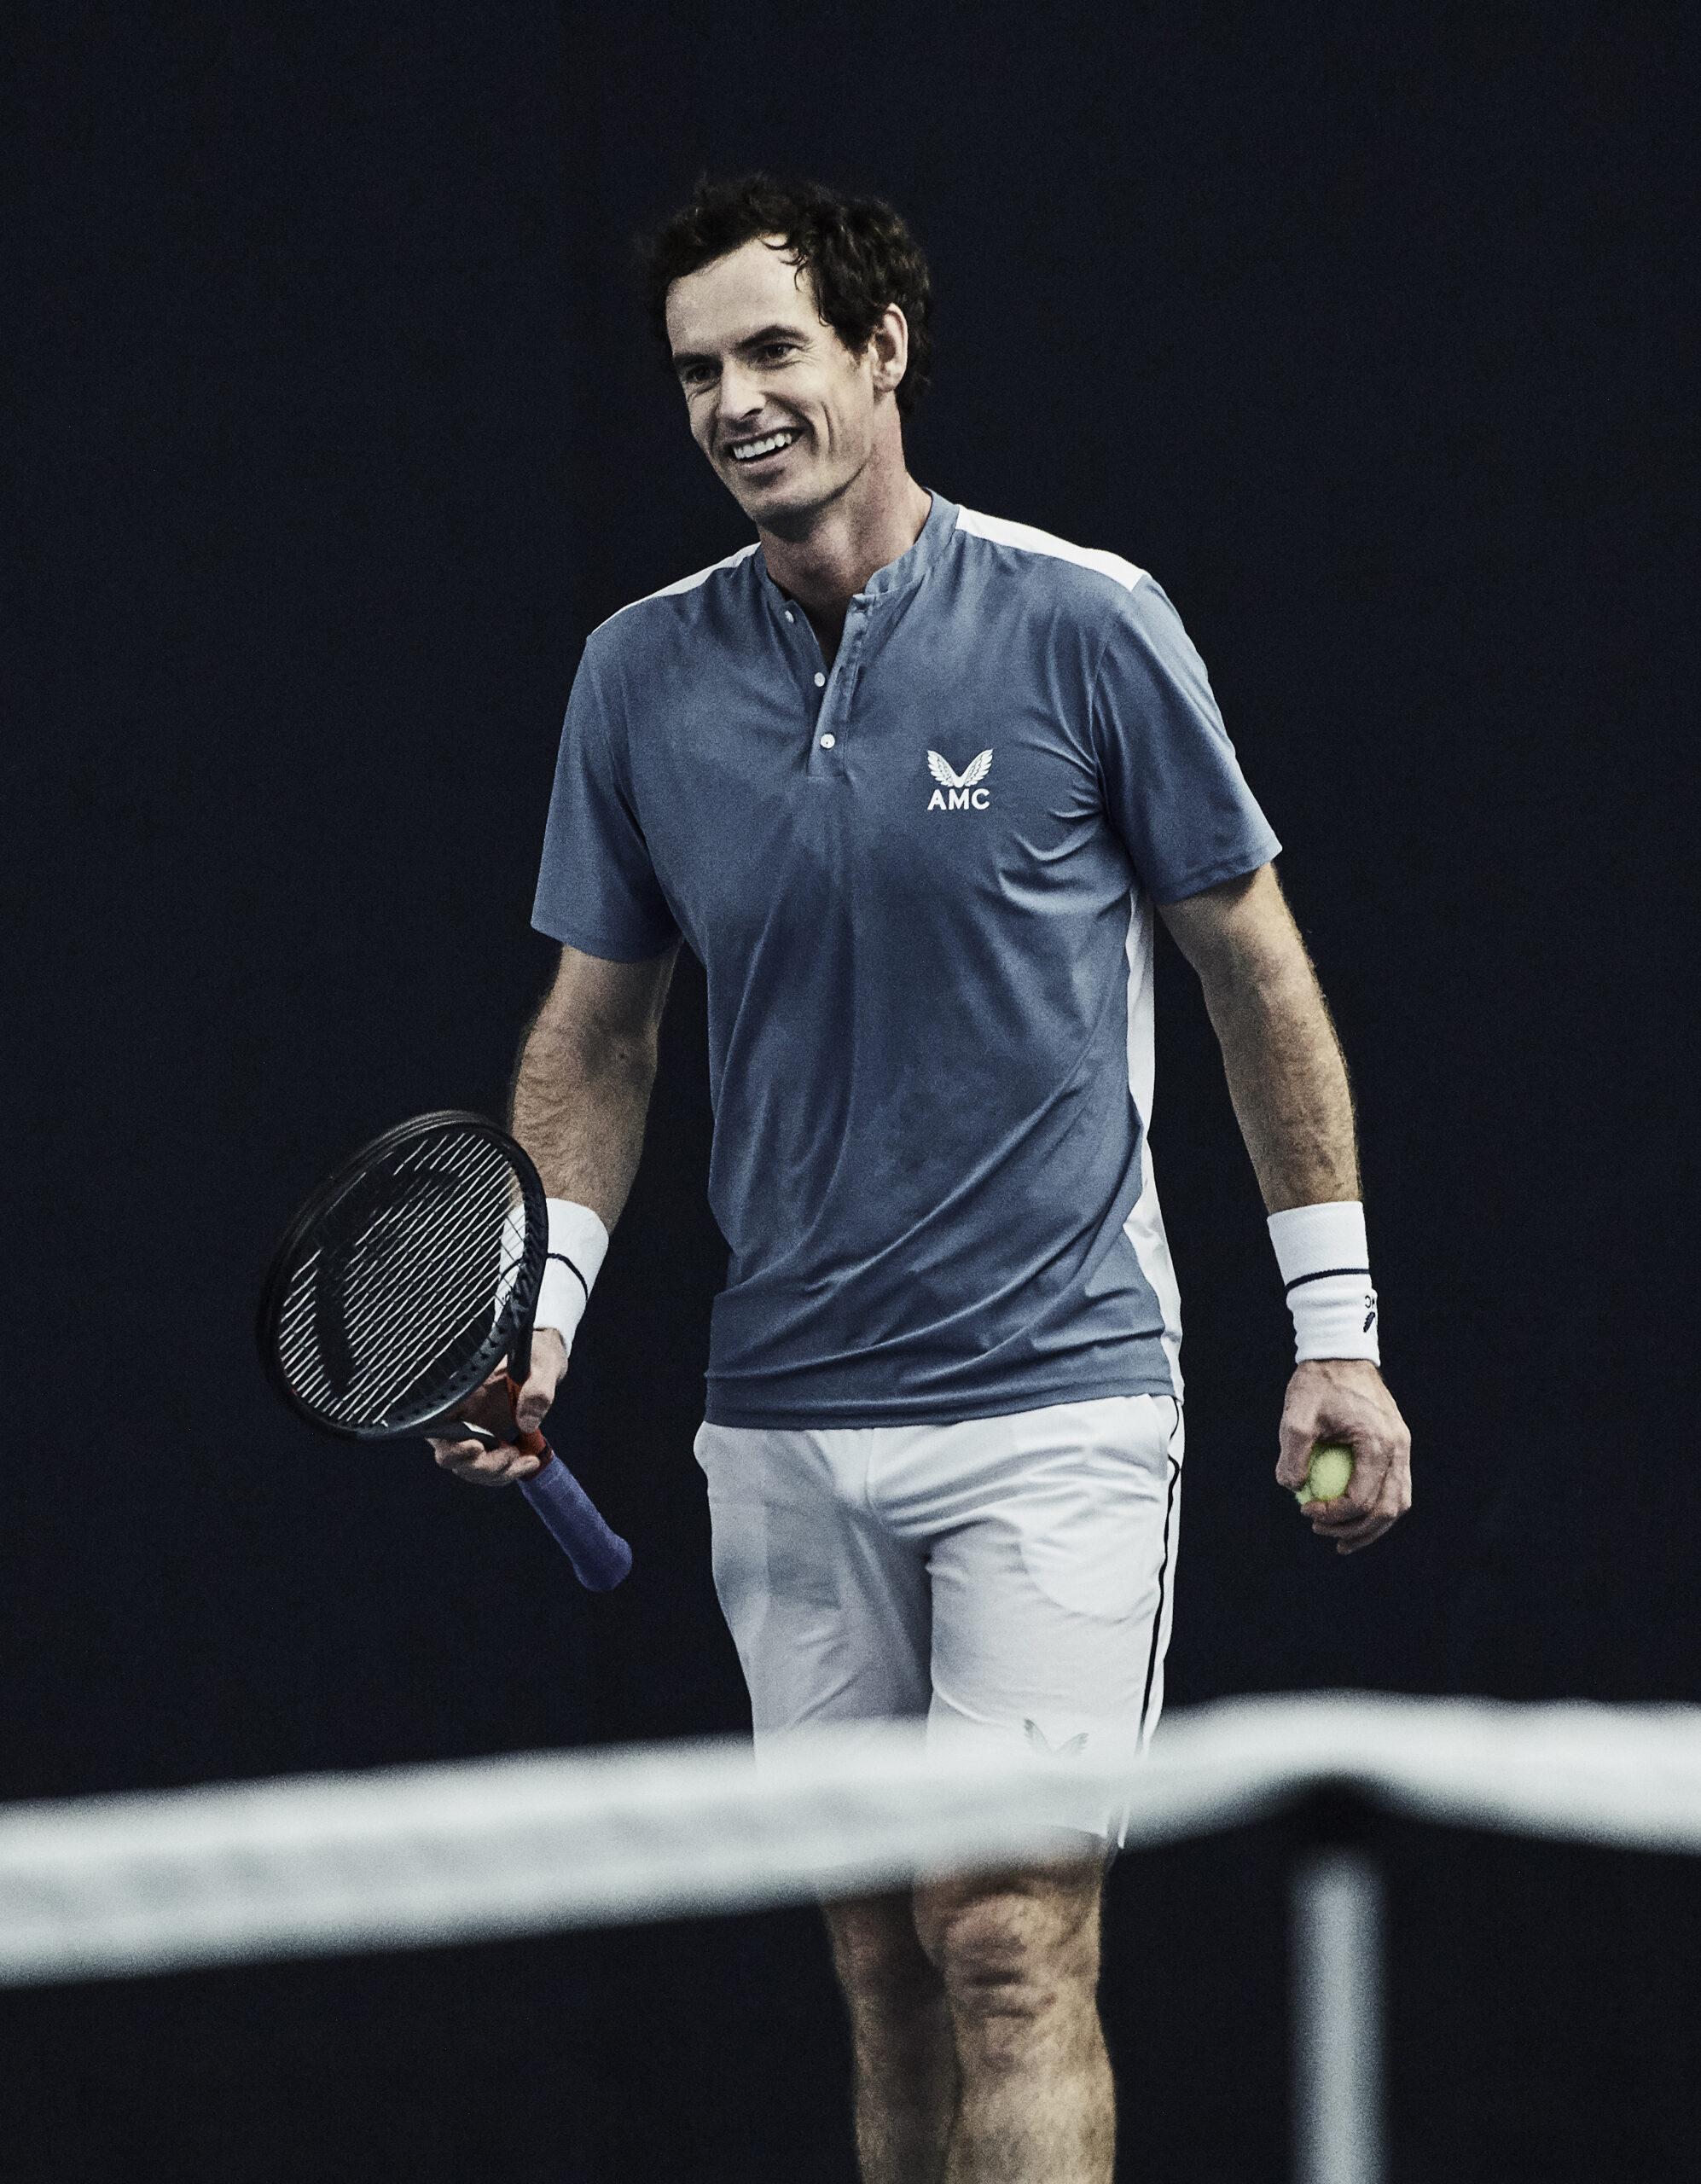 Andy Murray Speaking Engagements, Schedule, and Fee WSB